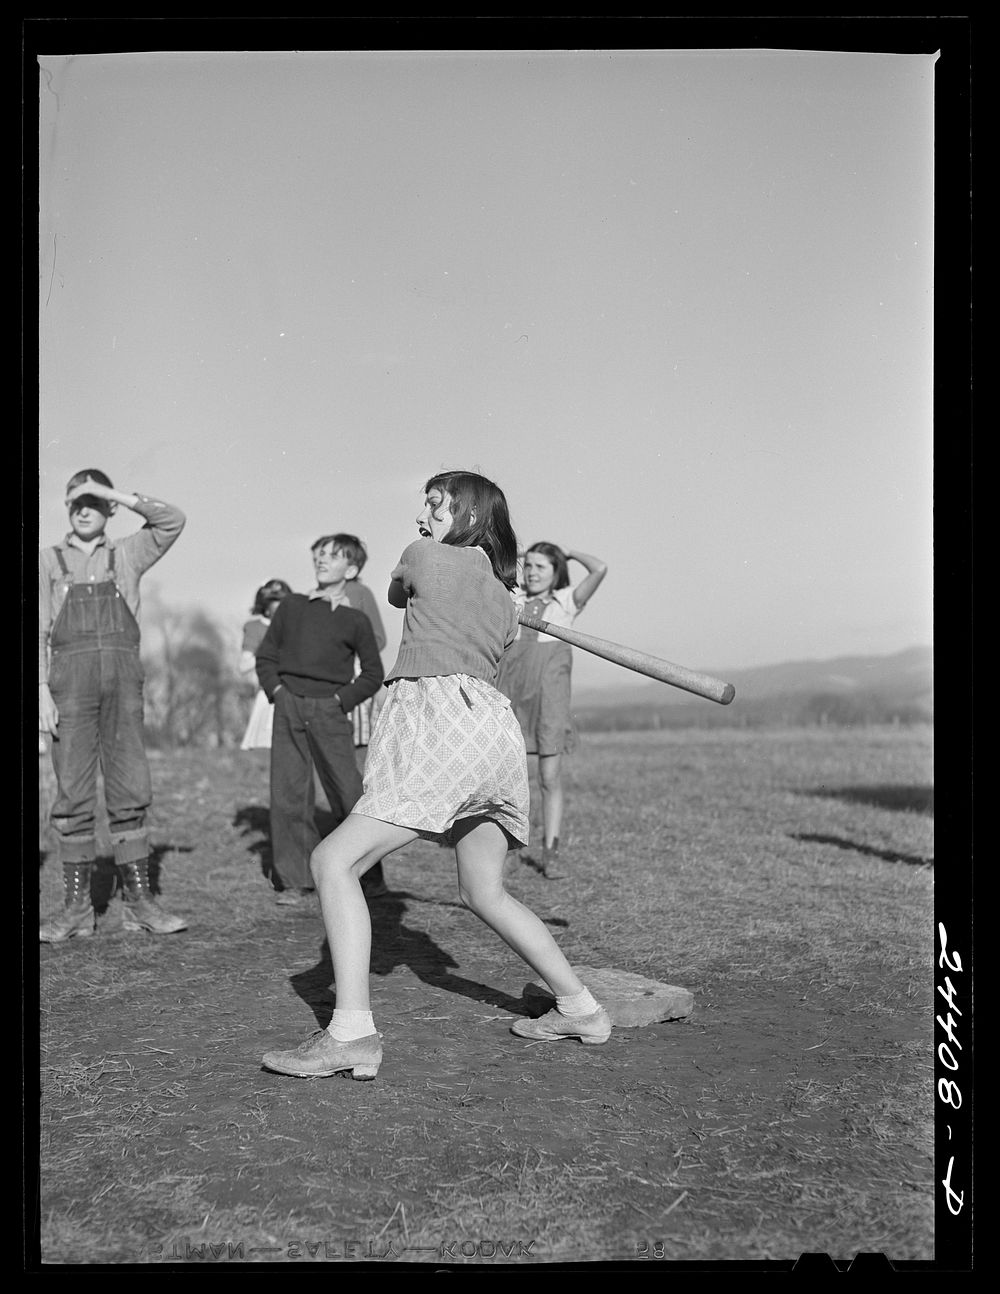 Baseball game, homestead school. Dailey, West Virginia. Sourced from the Library of Congress.